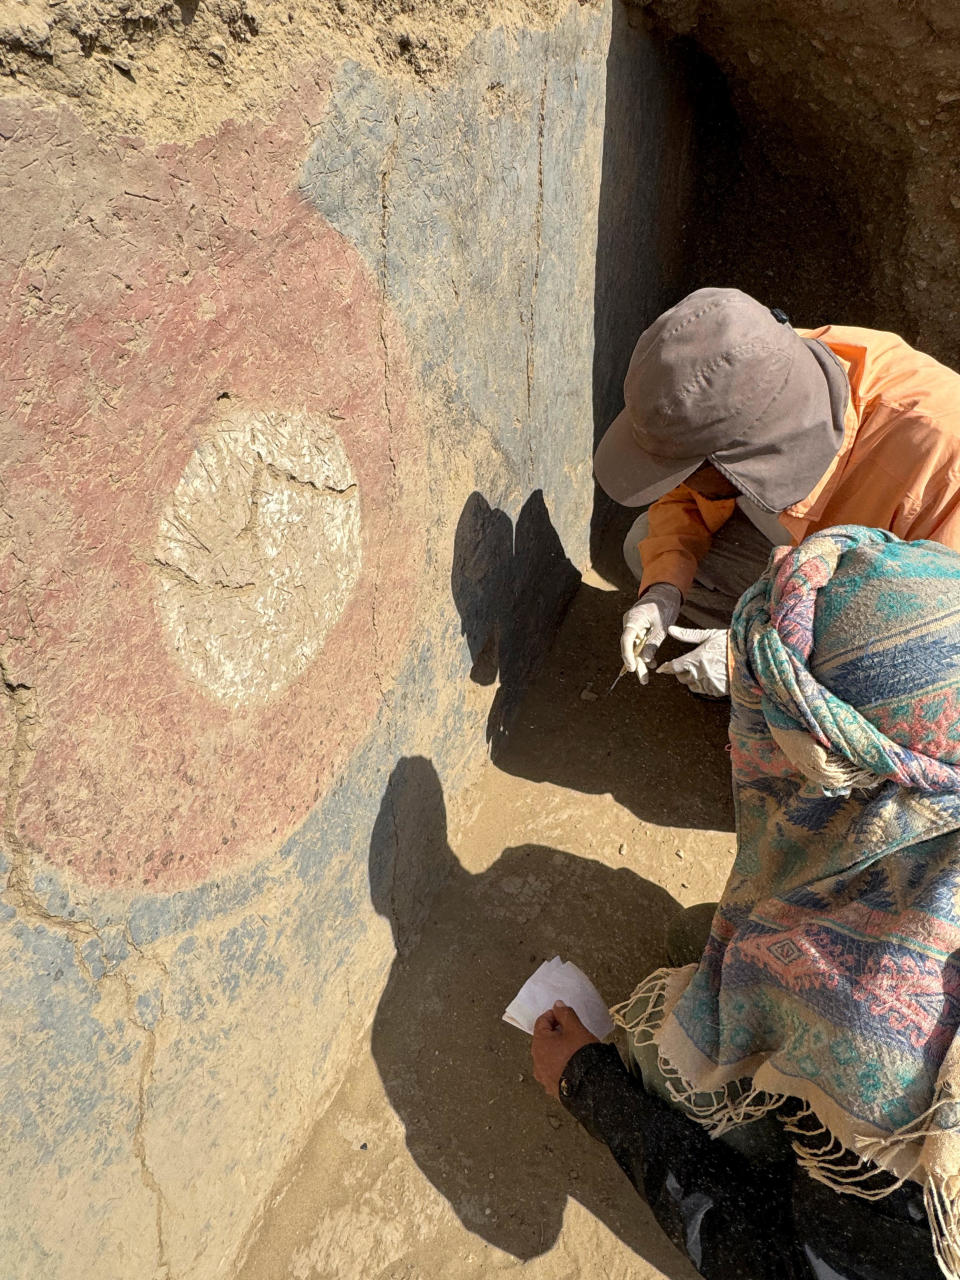 Archaeologists work on what's believed to be part of a 4,000-year-old ceremonial temple, found buried in a sand dune of northern Peru, in Lambayeque / Credit: Peru's Pontifical Catholic University/Handout via REUTERS